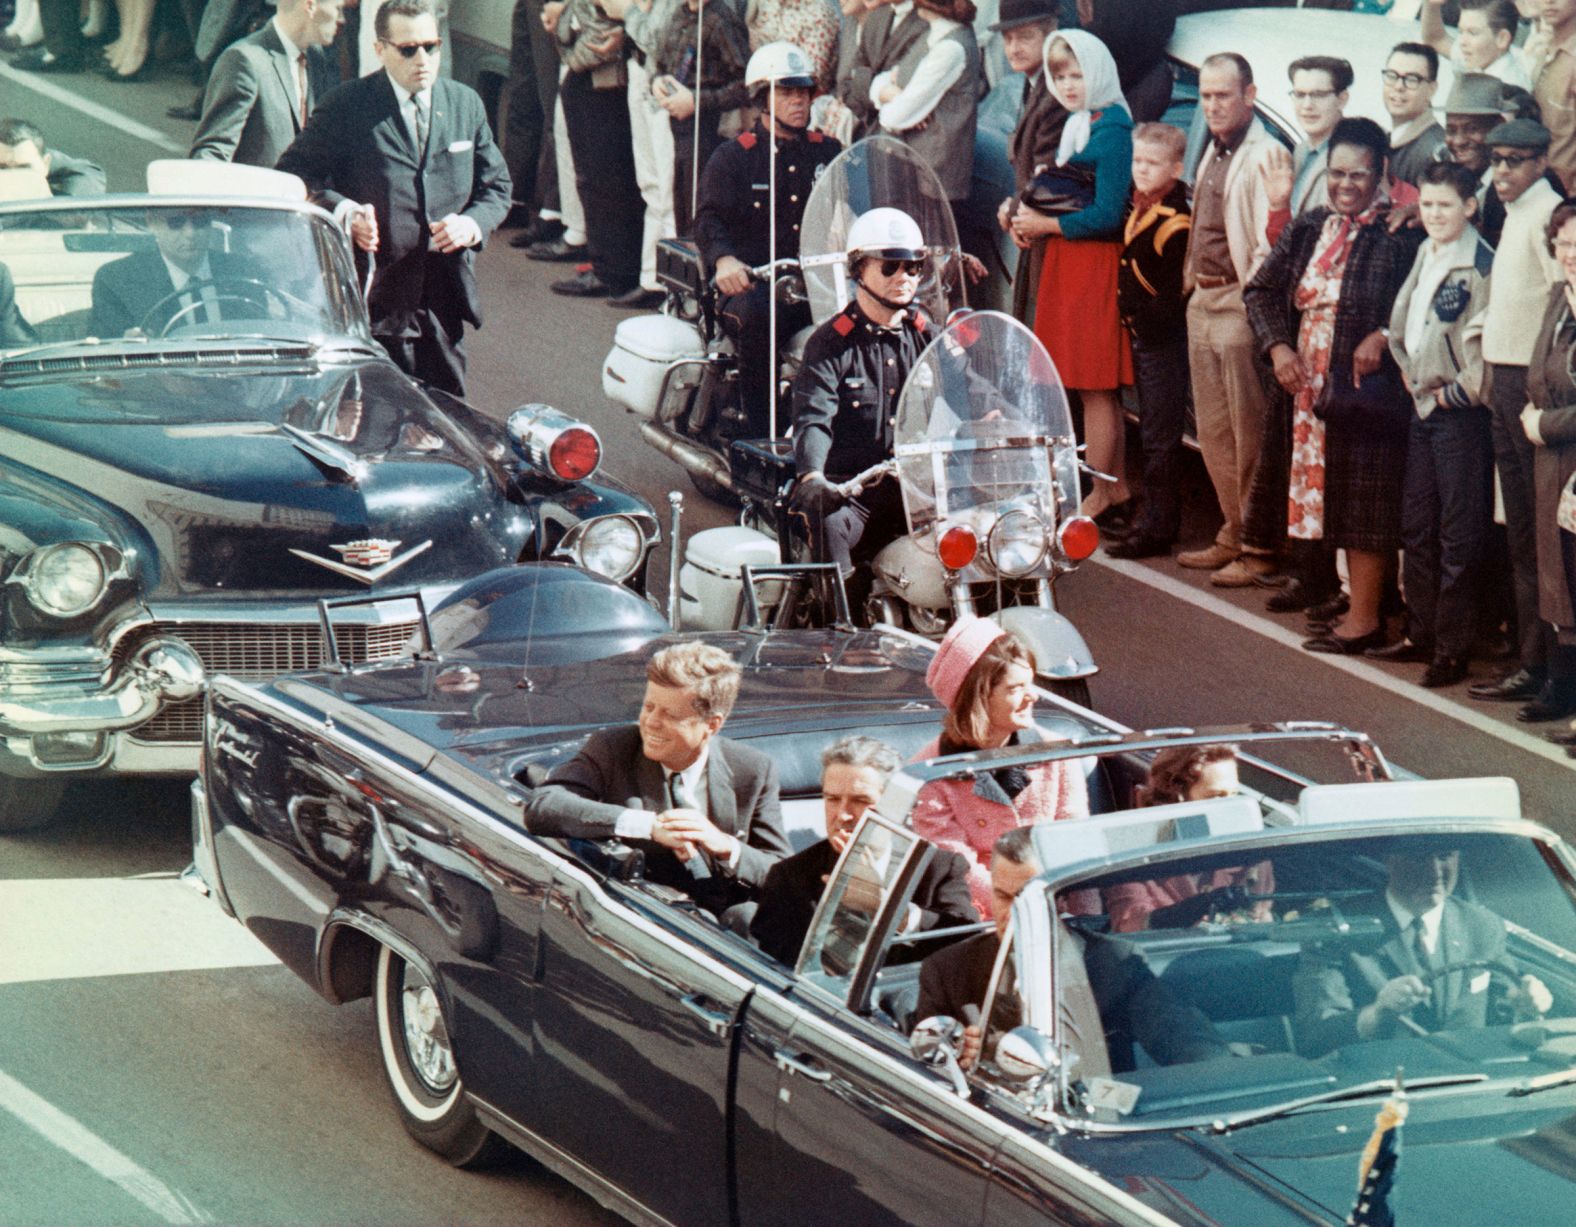 The Kennedys ride in the back seat of a limousine as the president's motorcade drives toward Dealey Plaza in Dallas on November 22, 1963. He was shot minutes later by Lee Harvey Oswald.